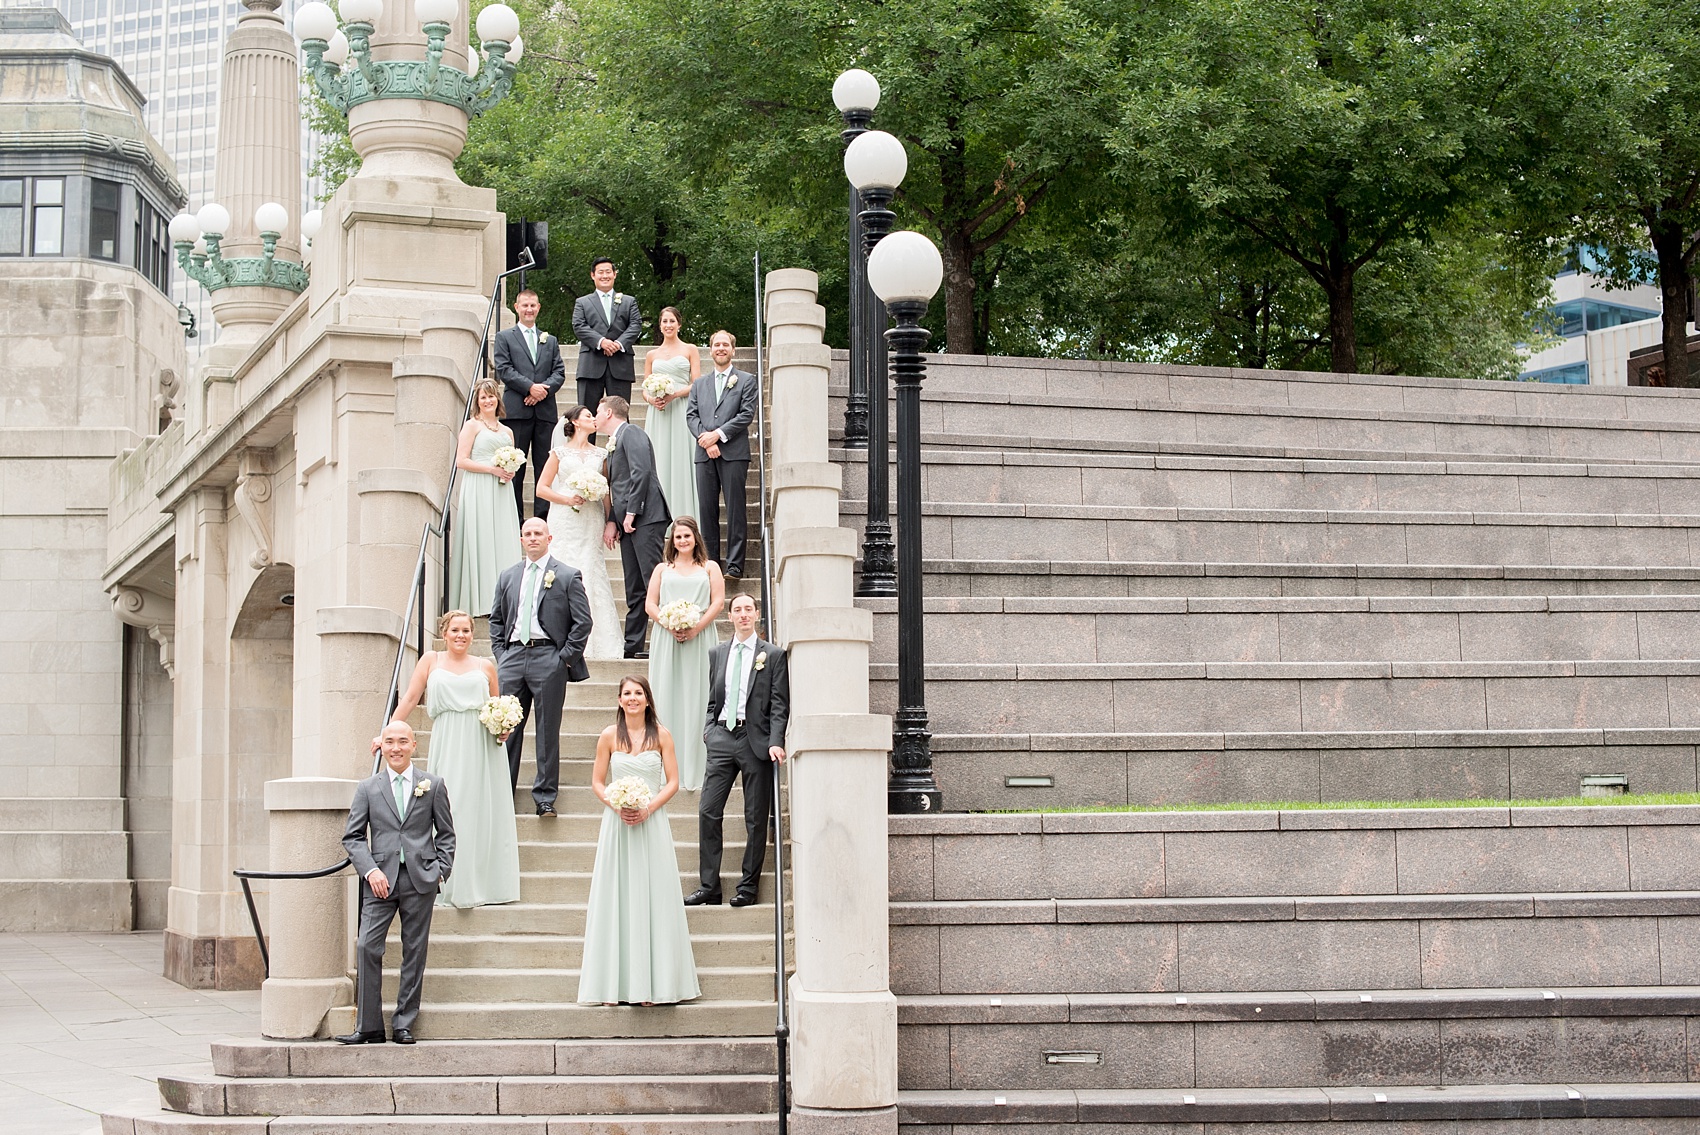 Mikkel Paige Photography photos of a wedding in downtown Chicago at The Rookery. Iconic, unique images of the bridal party in mint green and groomsmen in grey suits for wedding party pictures on Riverwalk.